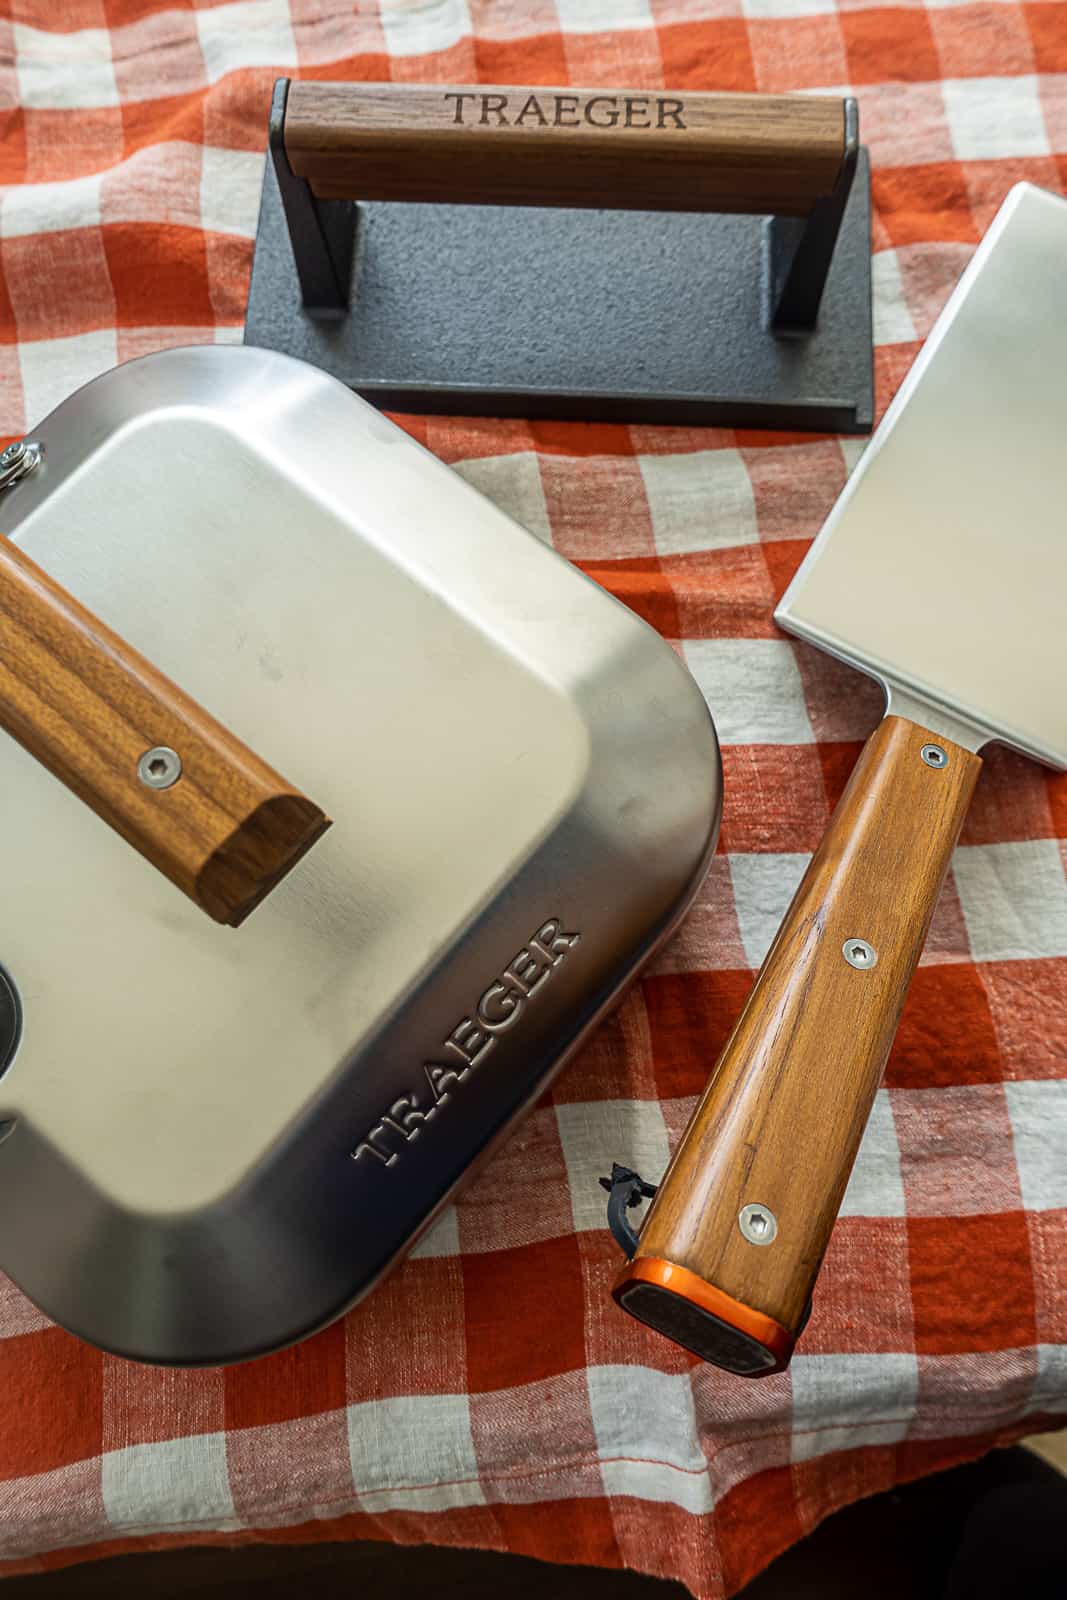 Tools for Griddle Cooking Smash Burgers from the Traeger Flatrock Smash Burger Kit